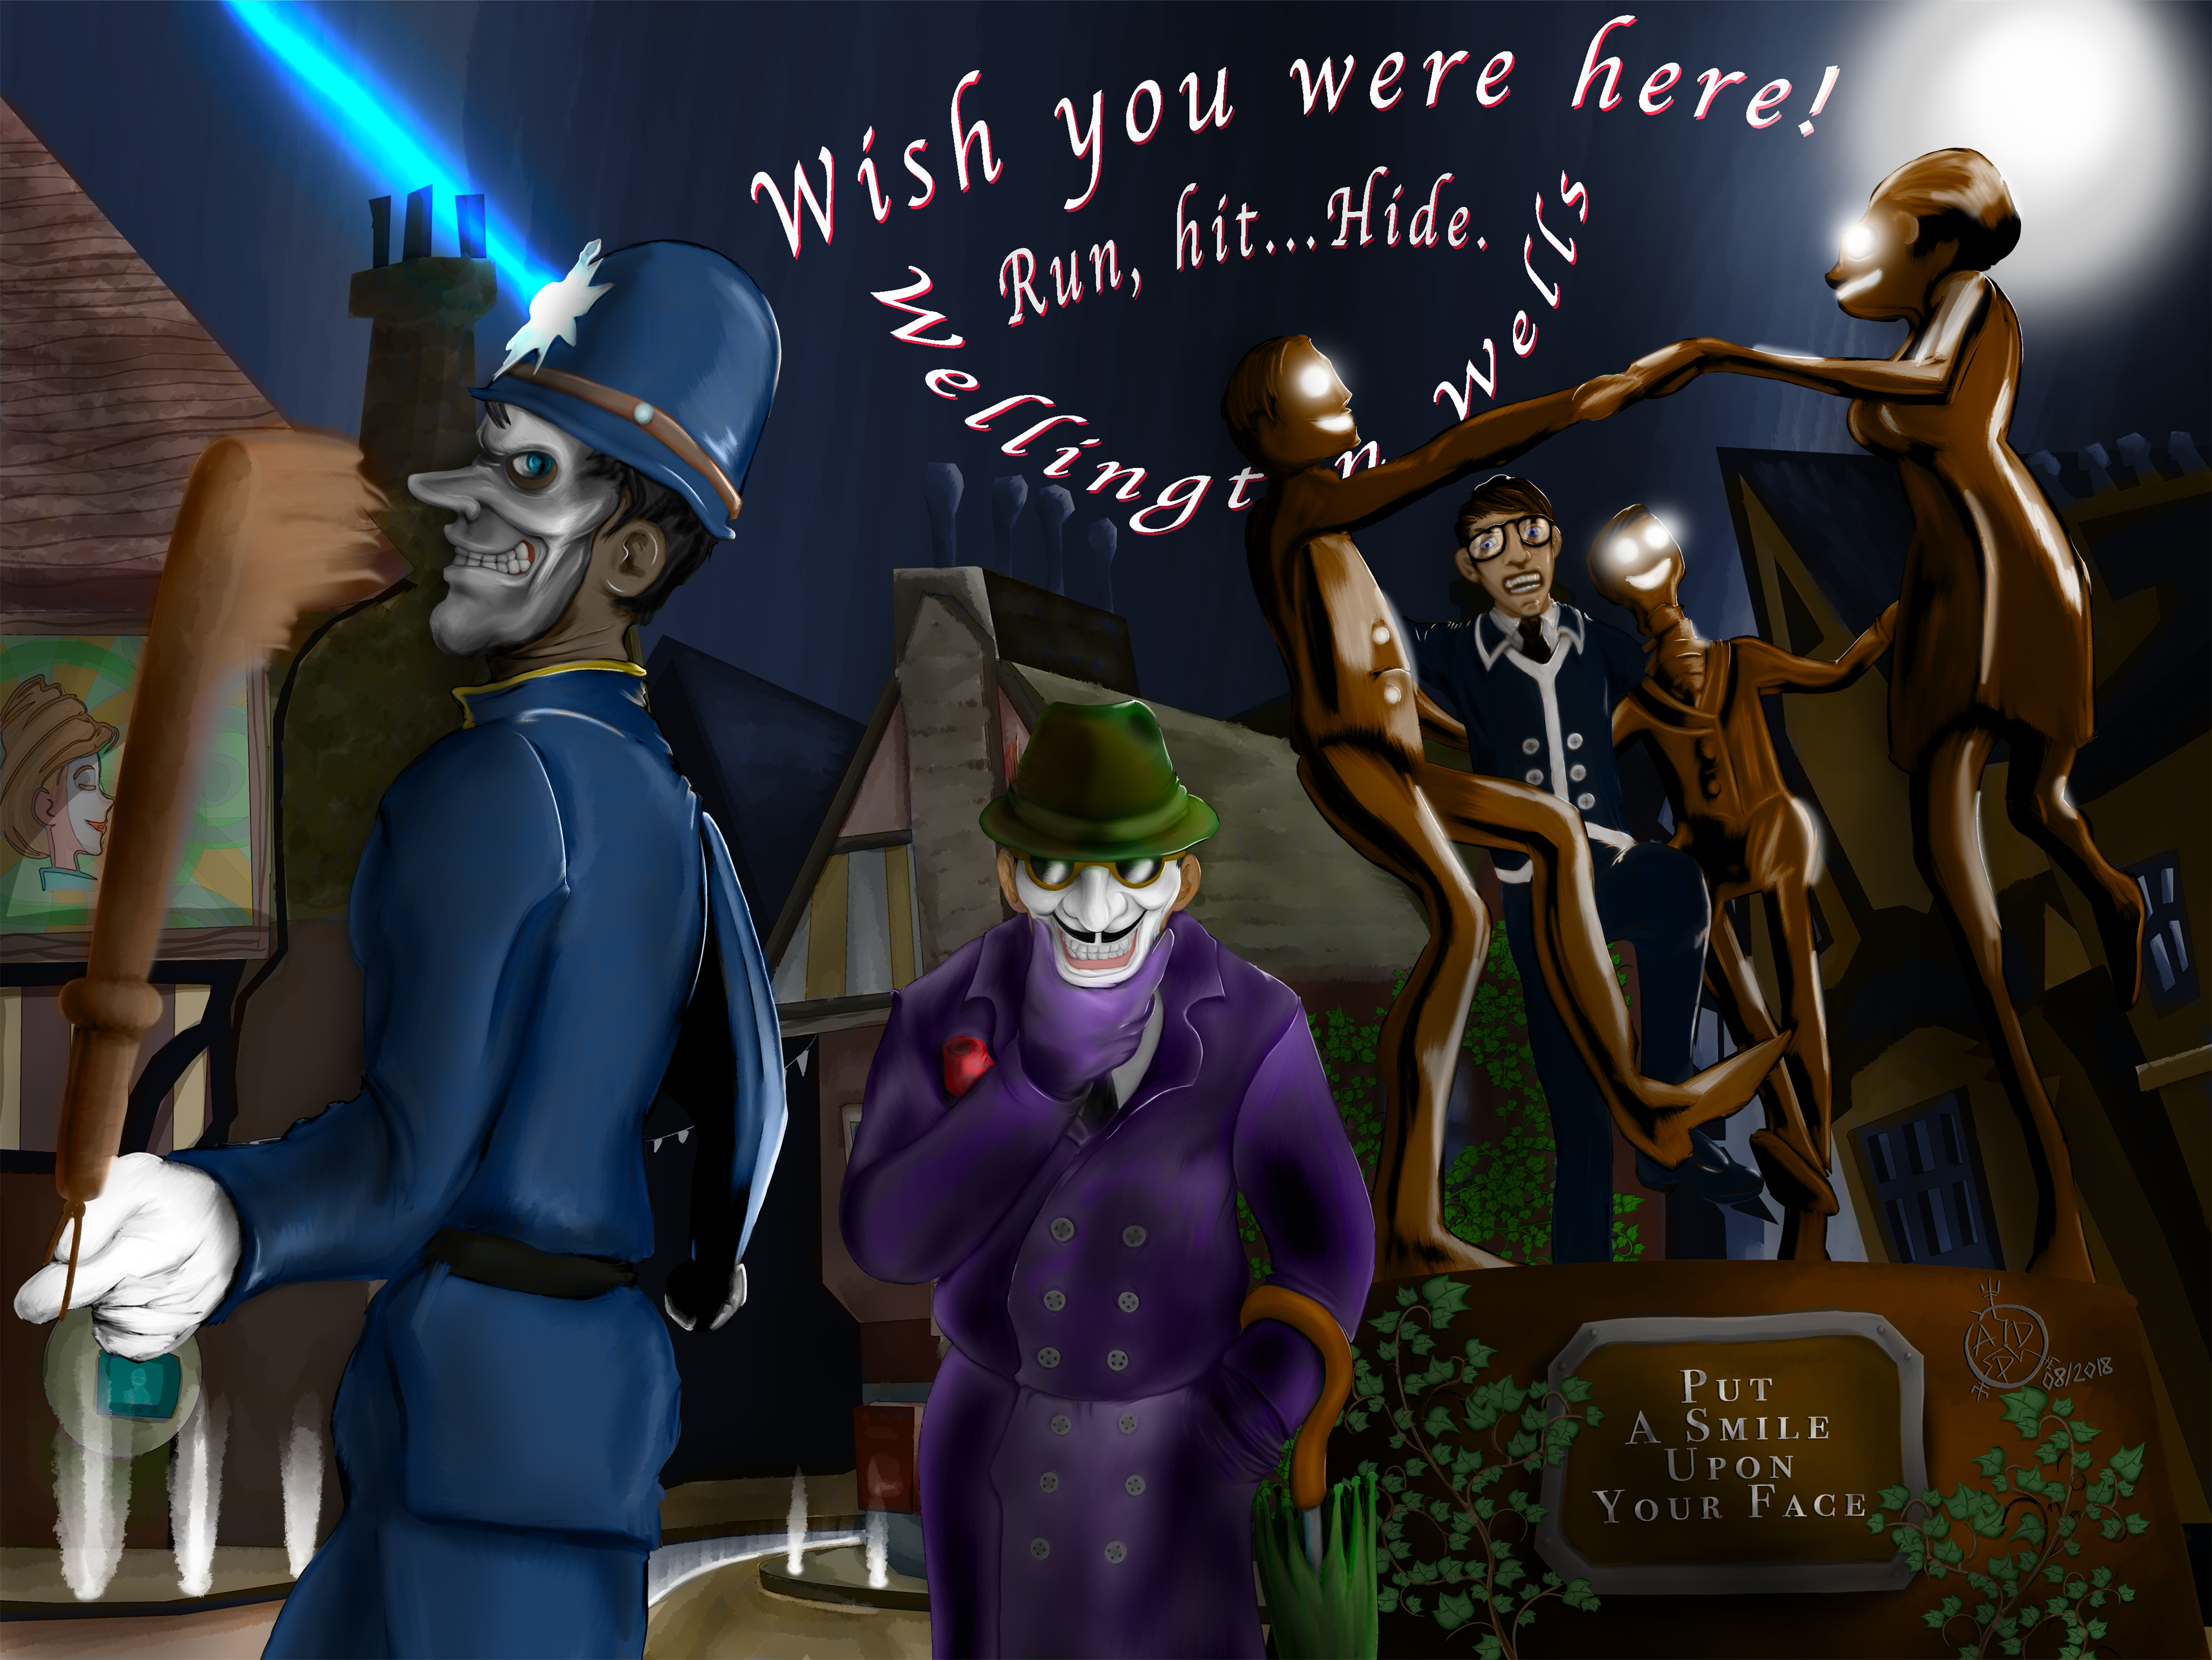 We Happy Few - Wish You Were Here by AndreaDiPietro on DeviantArt